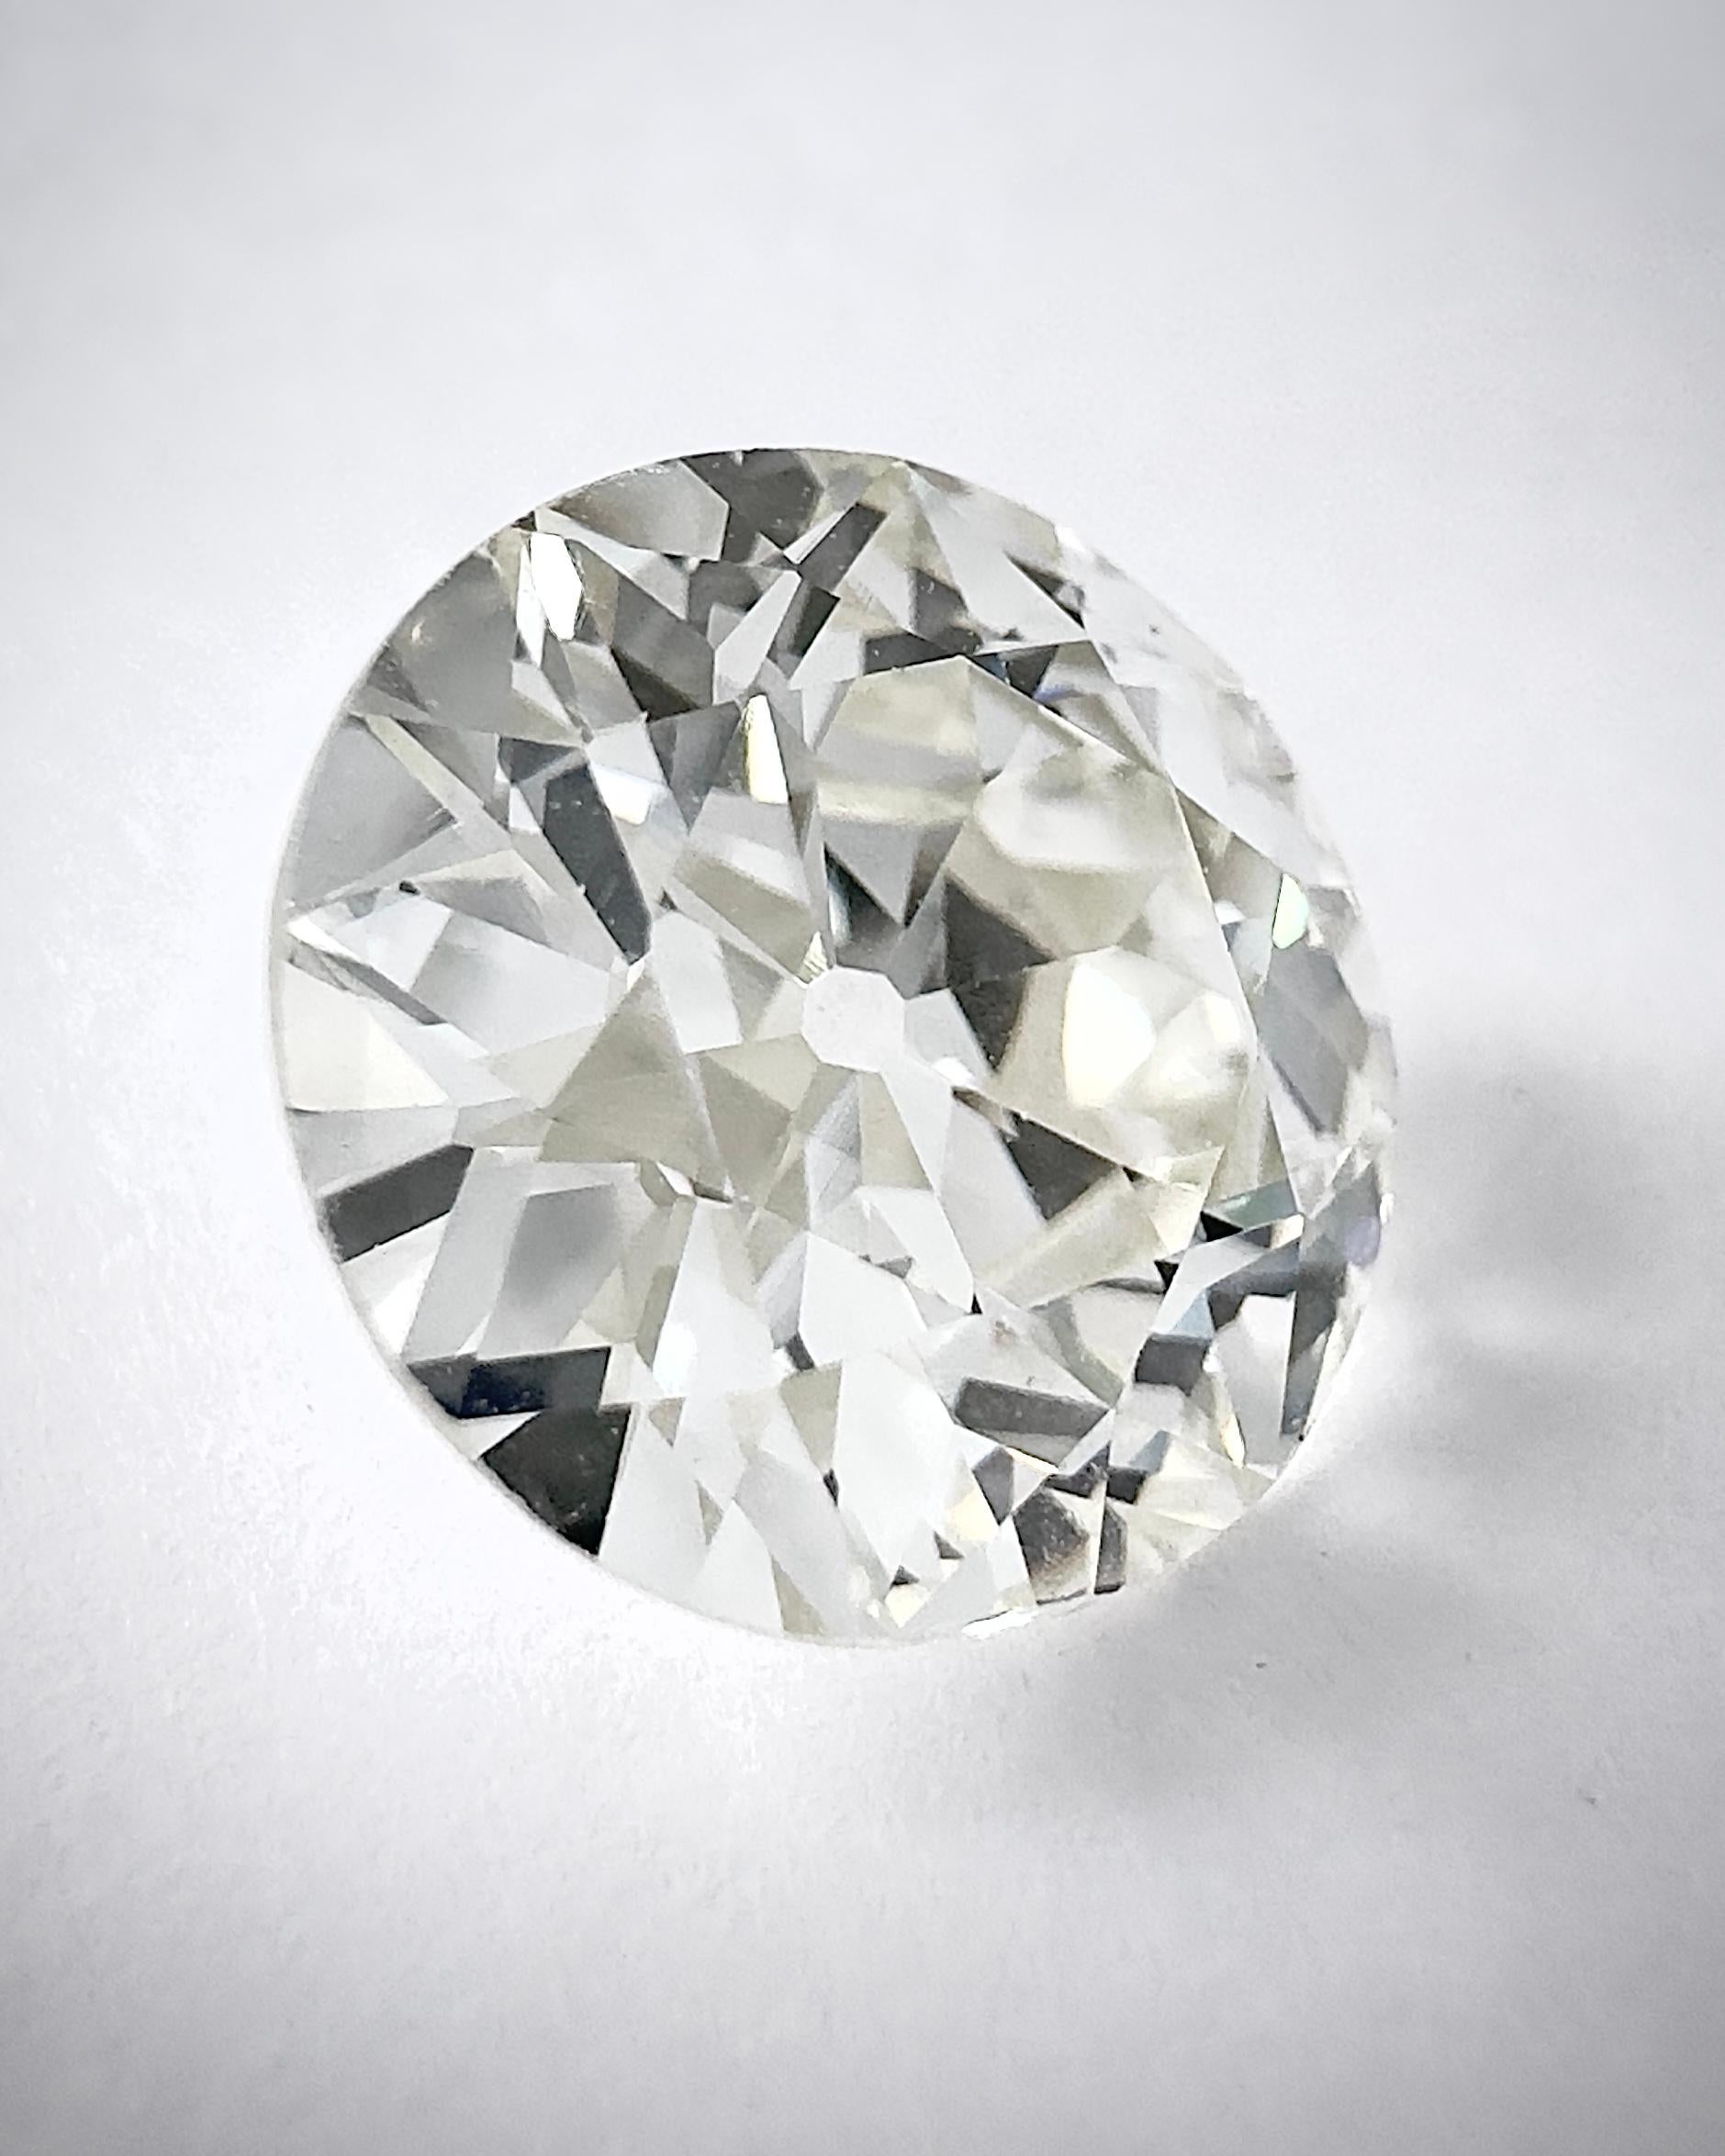 This Antique Old European Round Brilliant cut Diamond weights 3.78 carats with a K color (Beautiful white face up) and VS1 Clarity (Loupe Clean).
The high quality of its cut let the stone reveal an incredible brightness.
What is interesting with